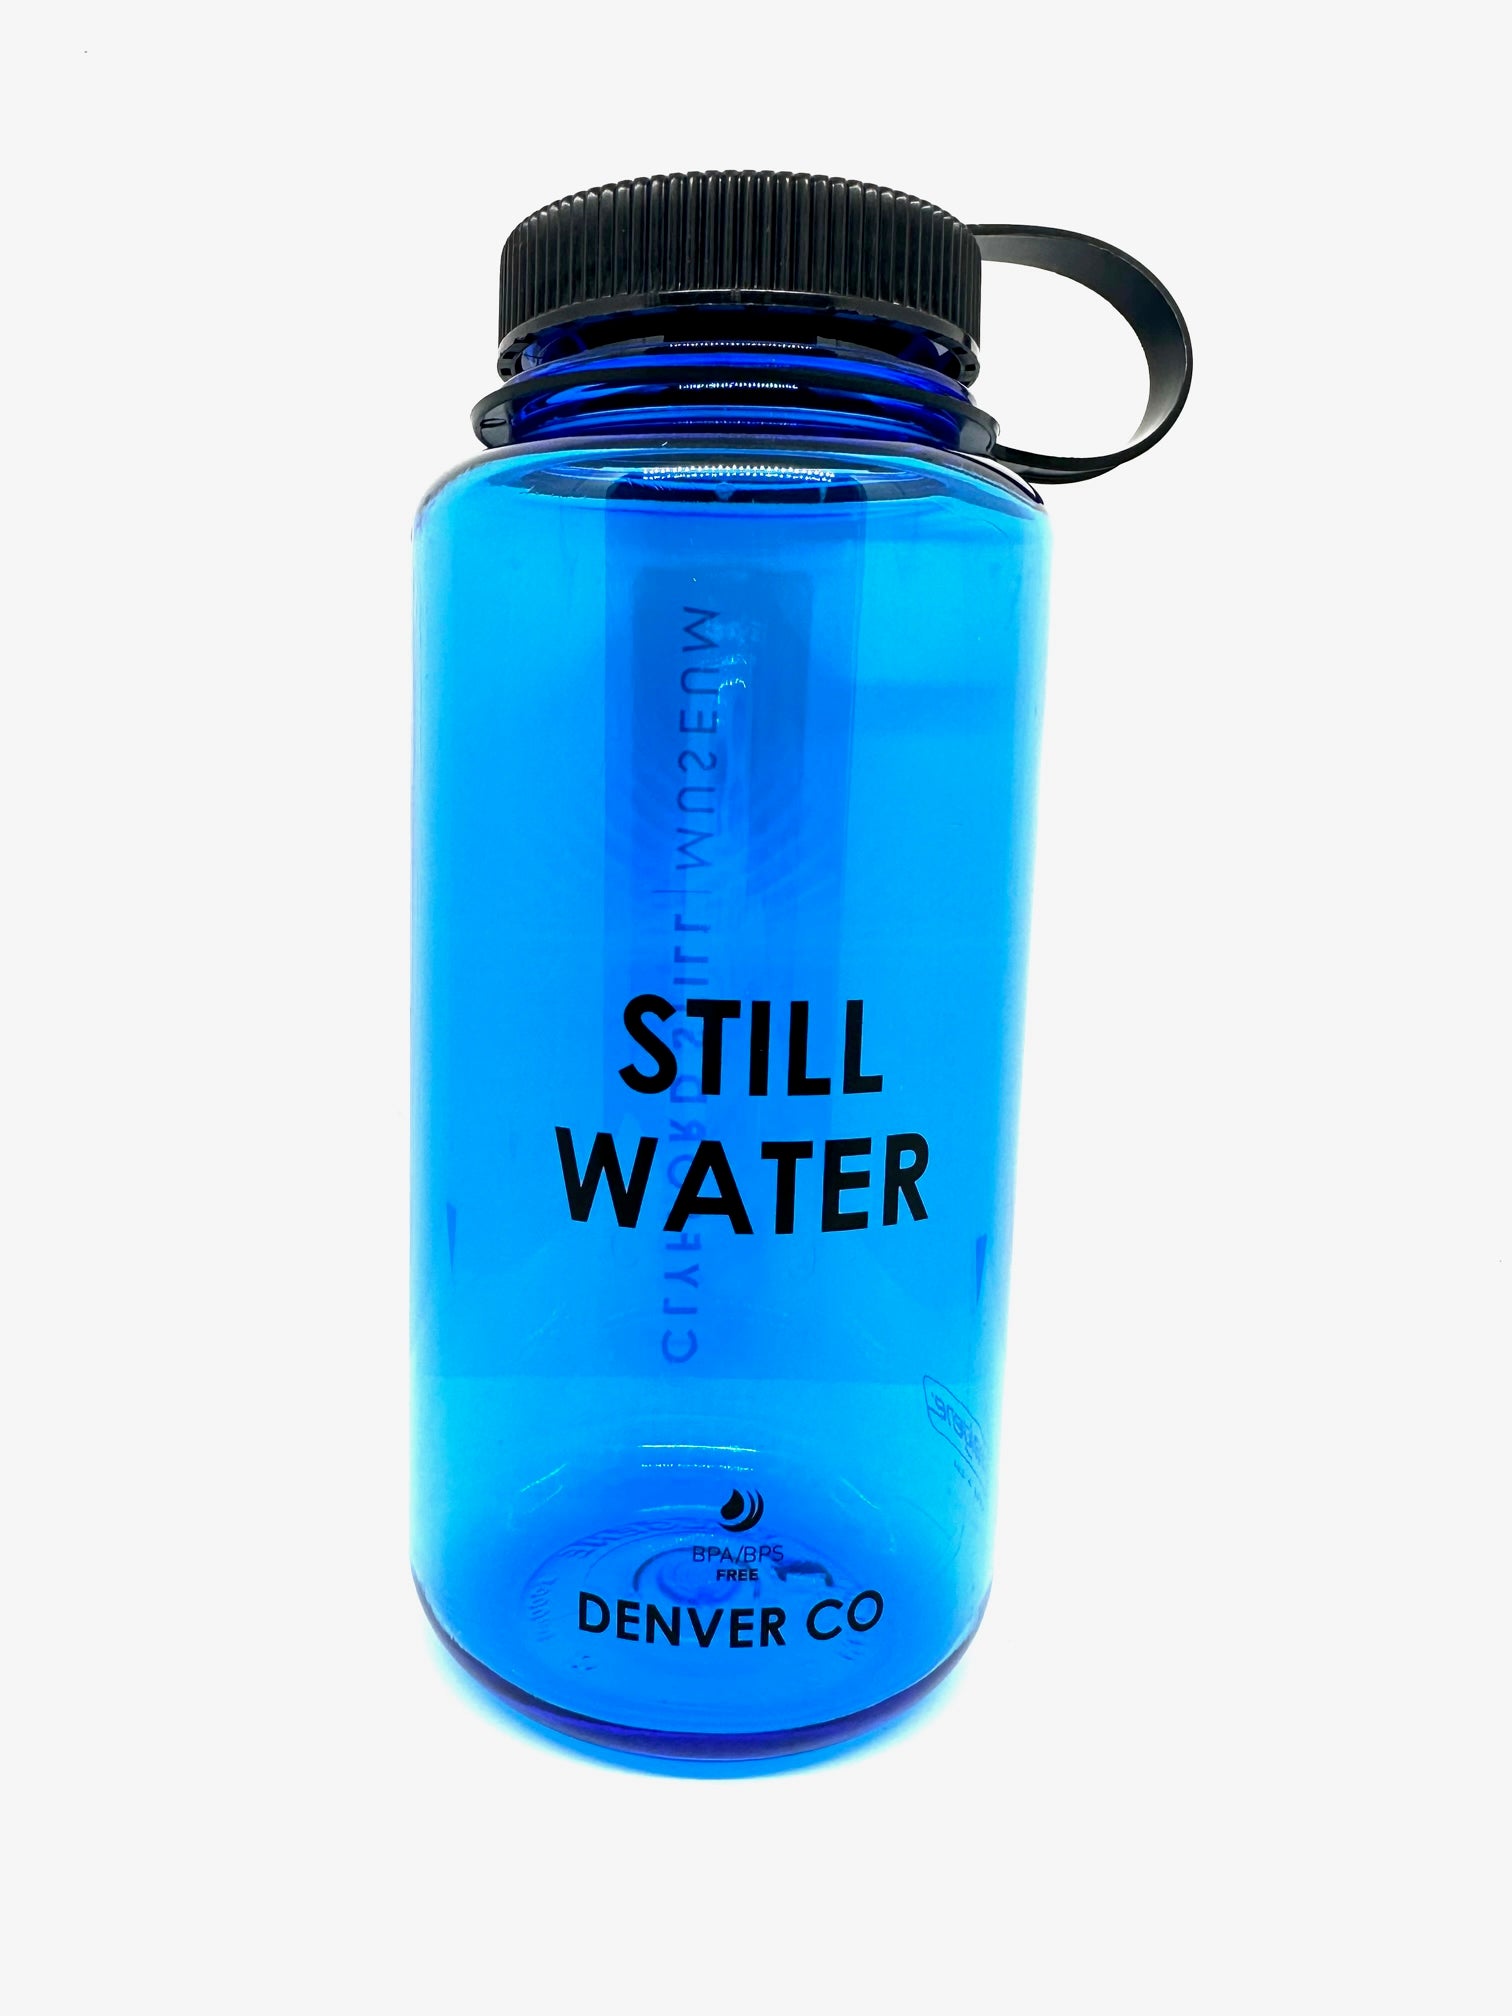 Slate blue with black cap Nalgene's classic 32oz wide-mouth water bottle with slogan “STILL WATER”.